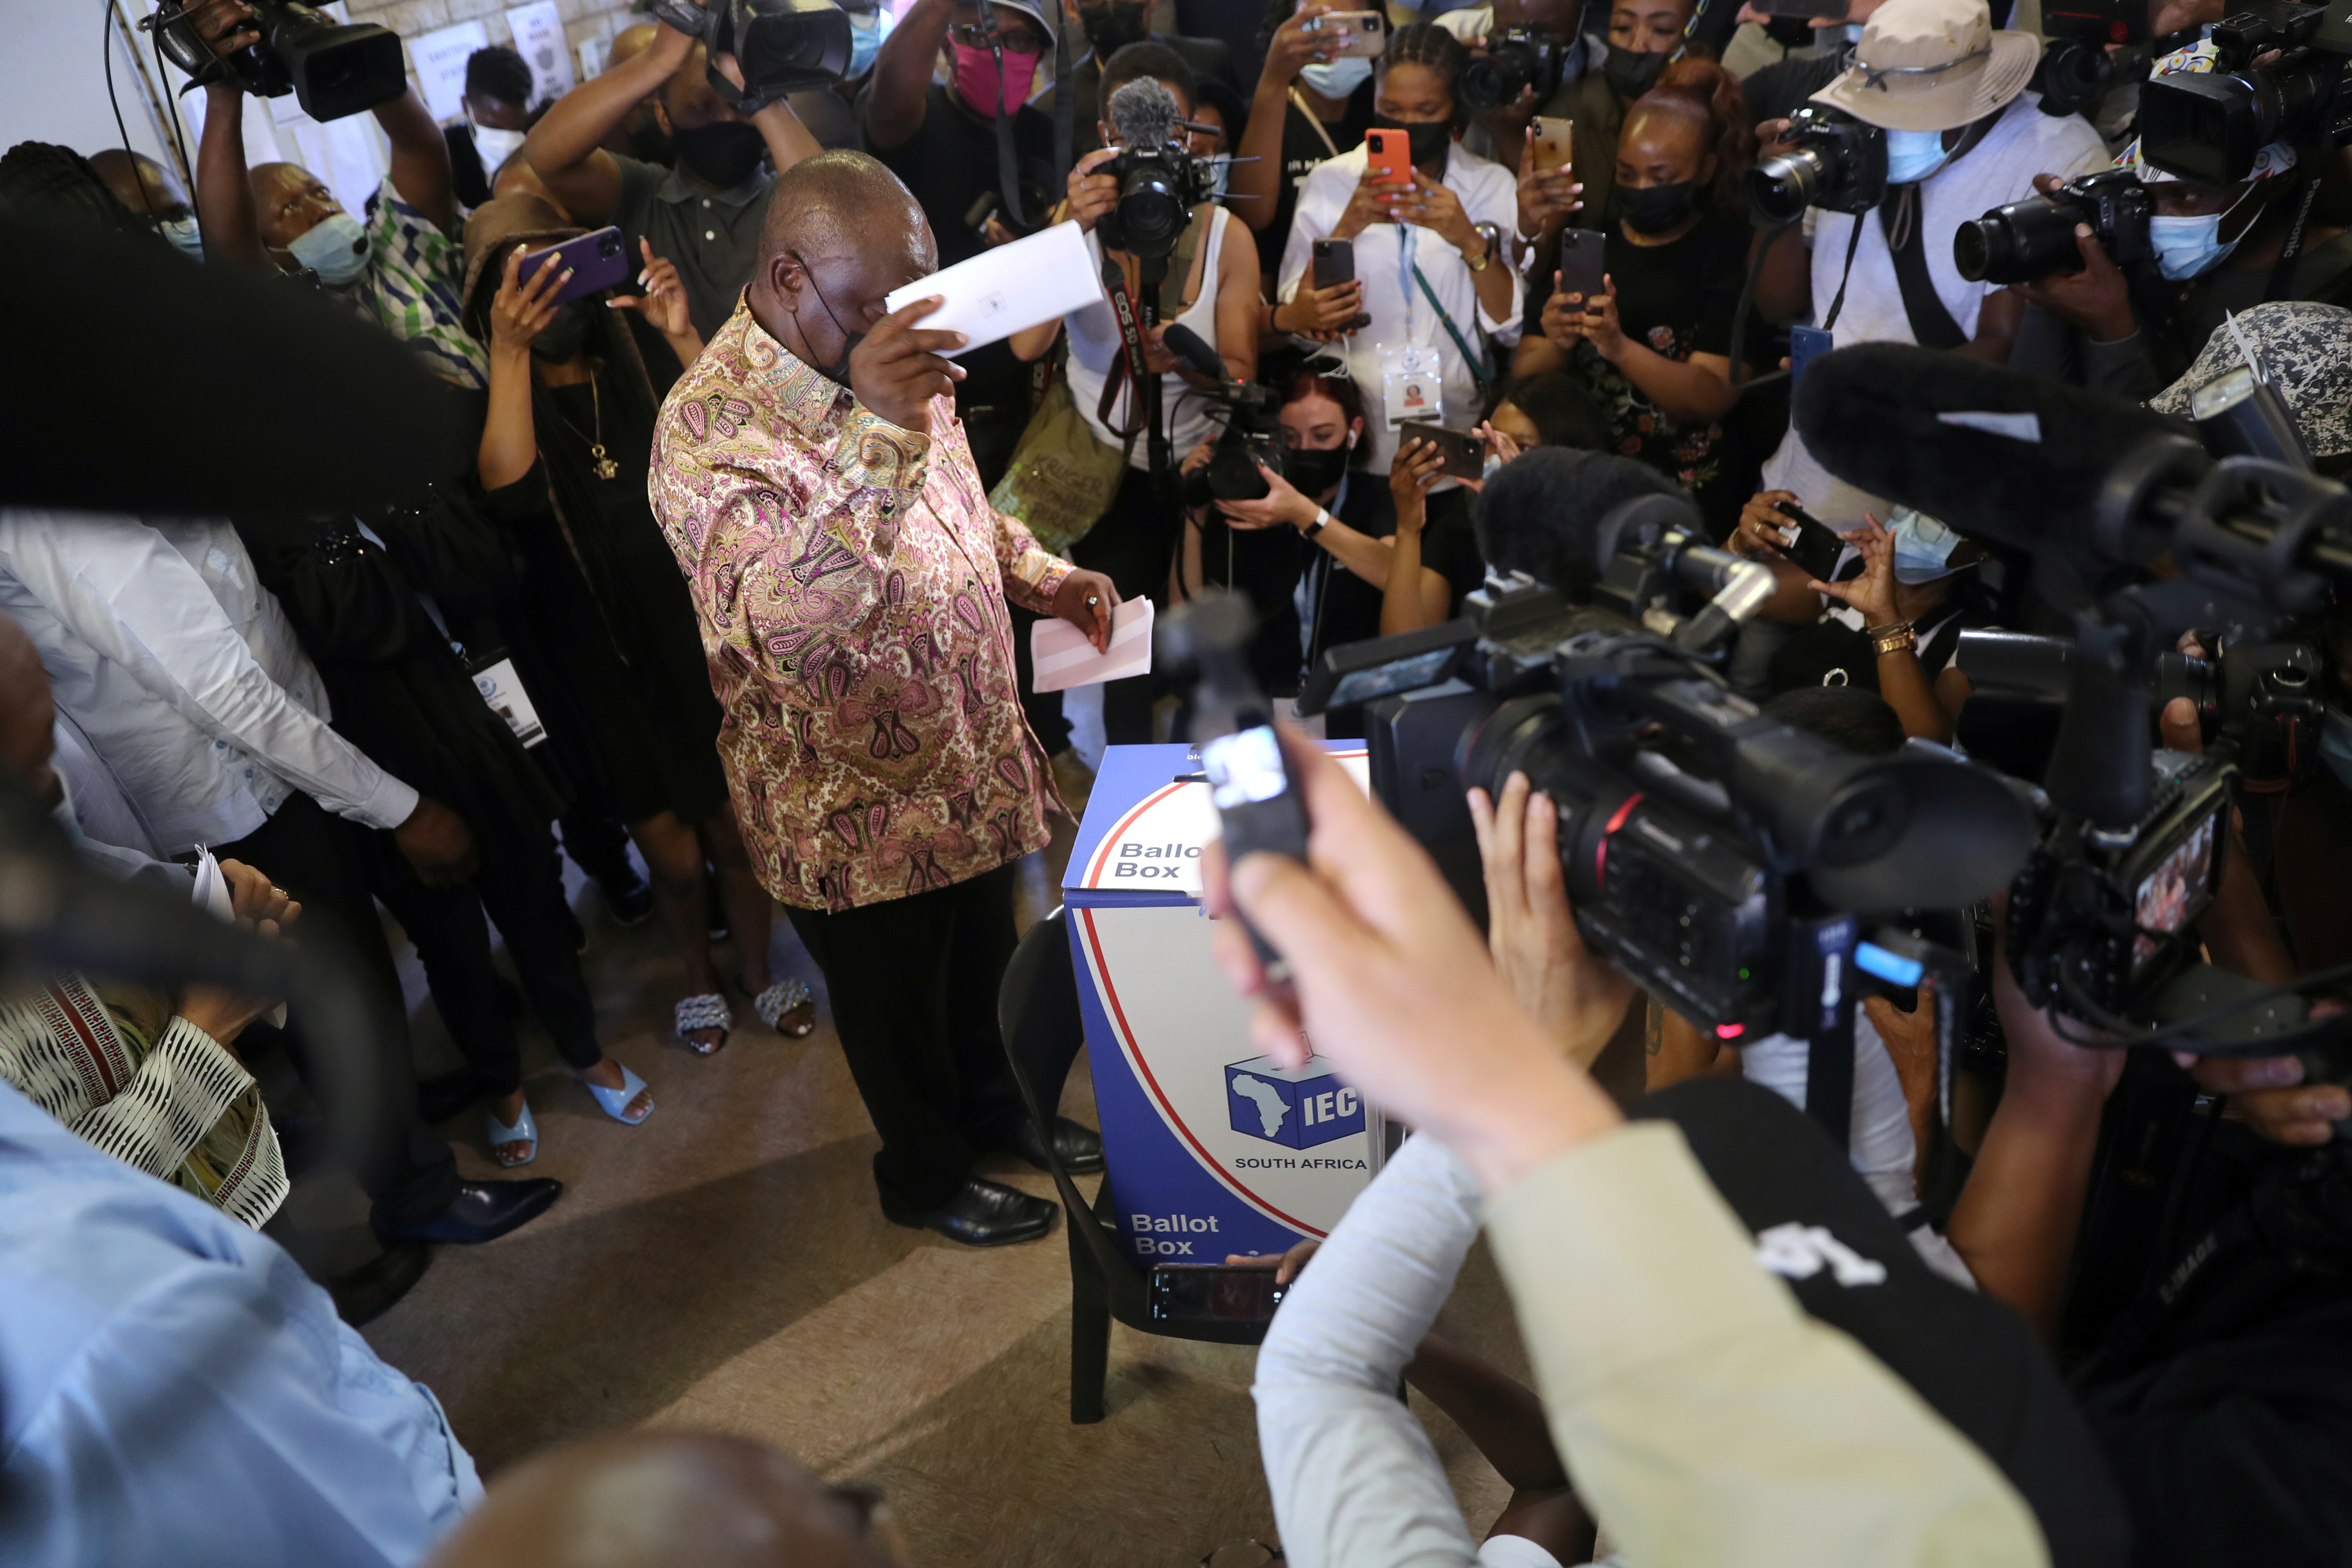 South African President Cyril Ramaphosa casts his ballot at a polling station during local government elections in Soweto, Johannesburg, South Africa, November 1, 2021. REUTERS/Sumaya Hisham